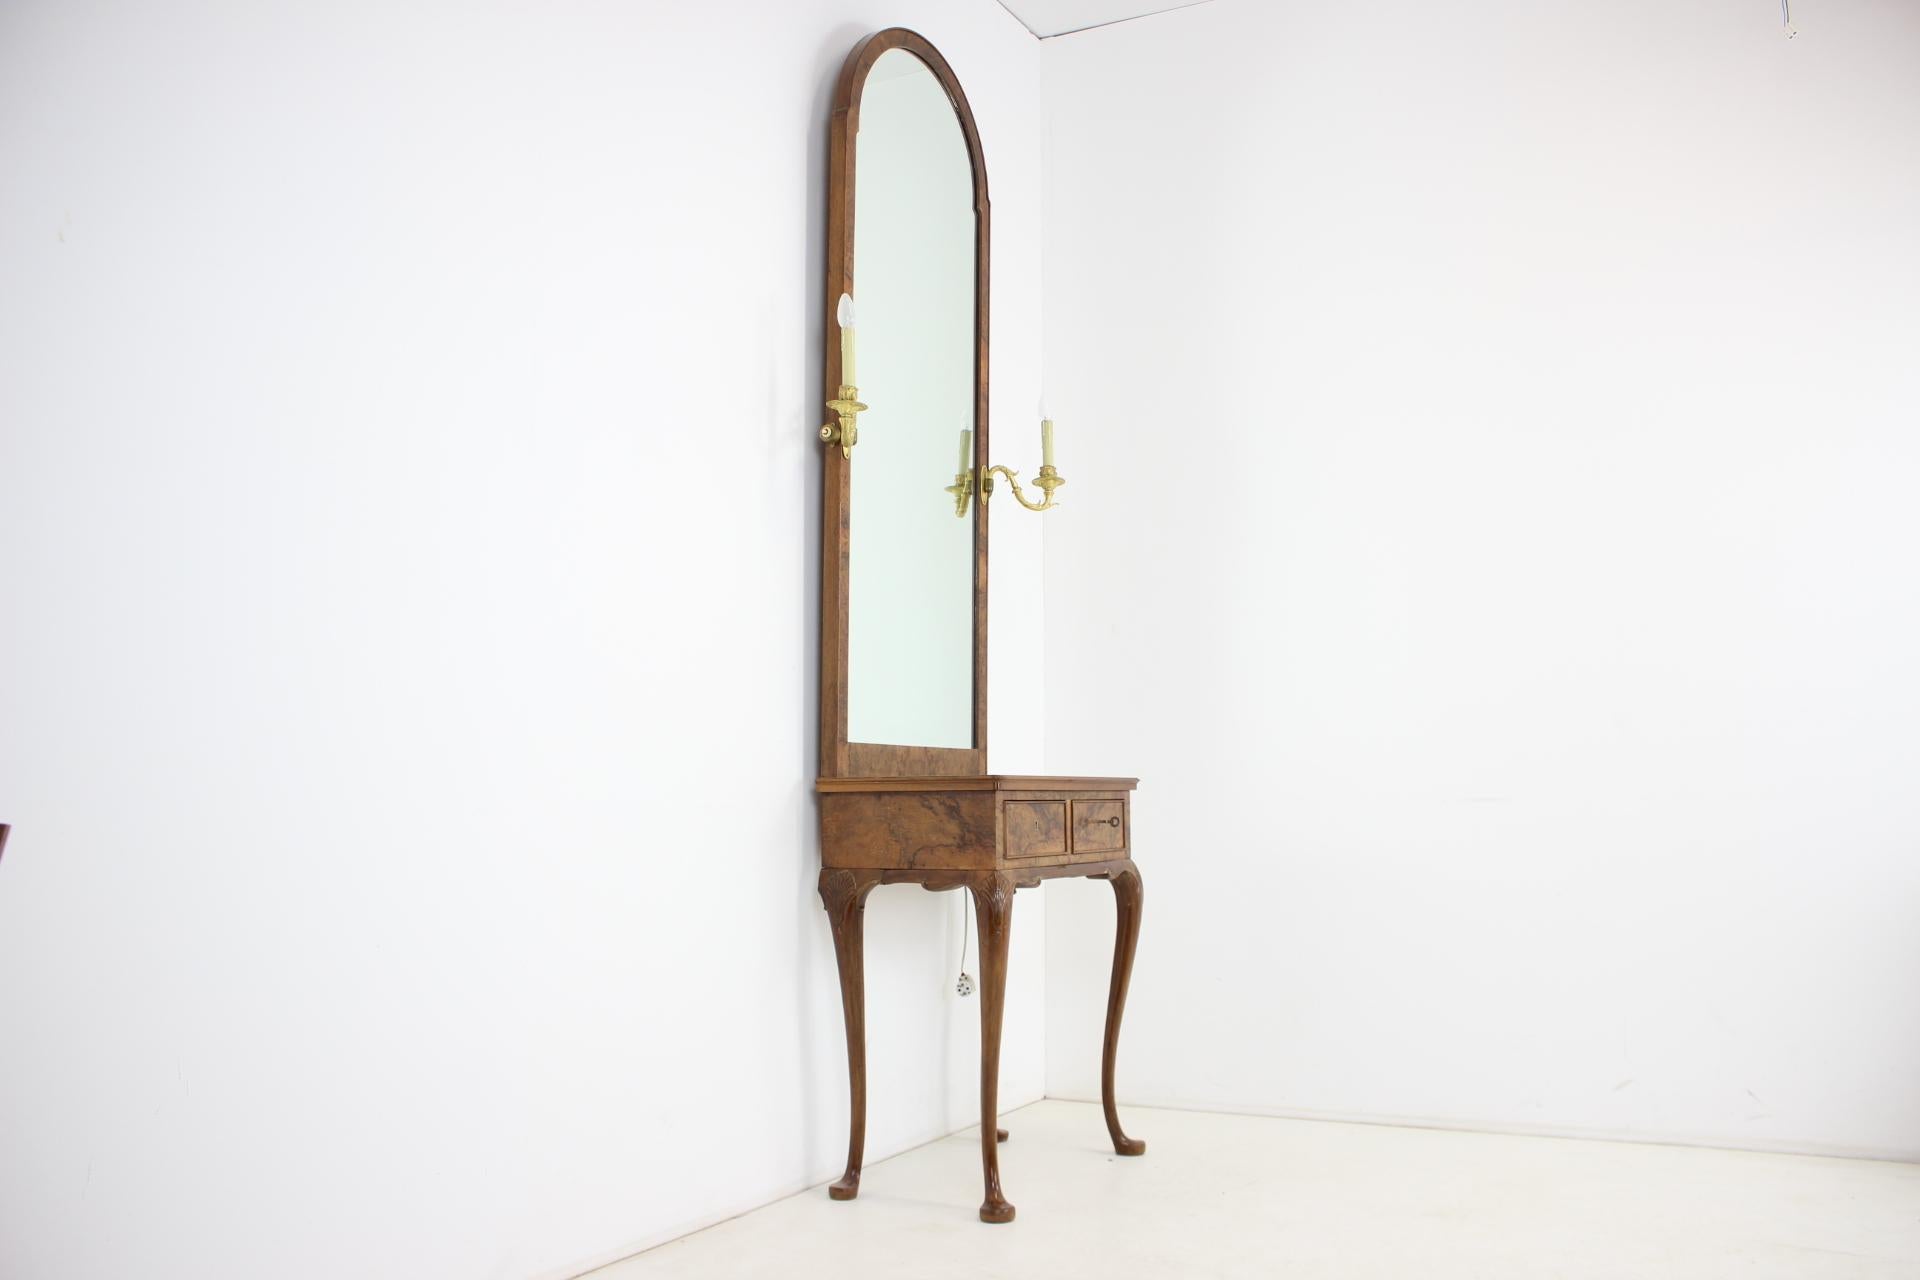 - Made in Czechoslovakia
- Made of glass, brass, root veneer, wood and mirror
- Shows signs of use
- Good, original condition.